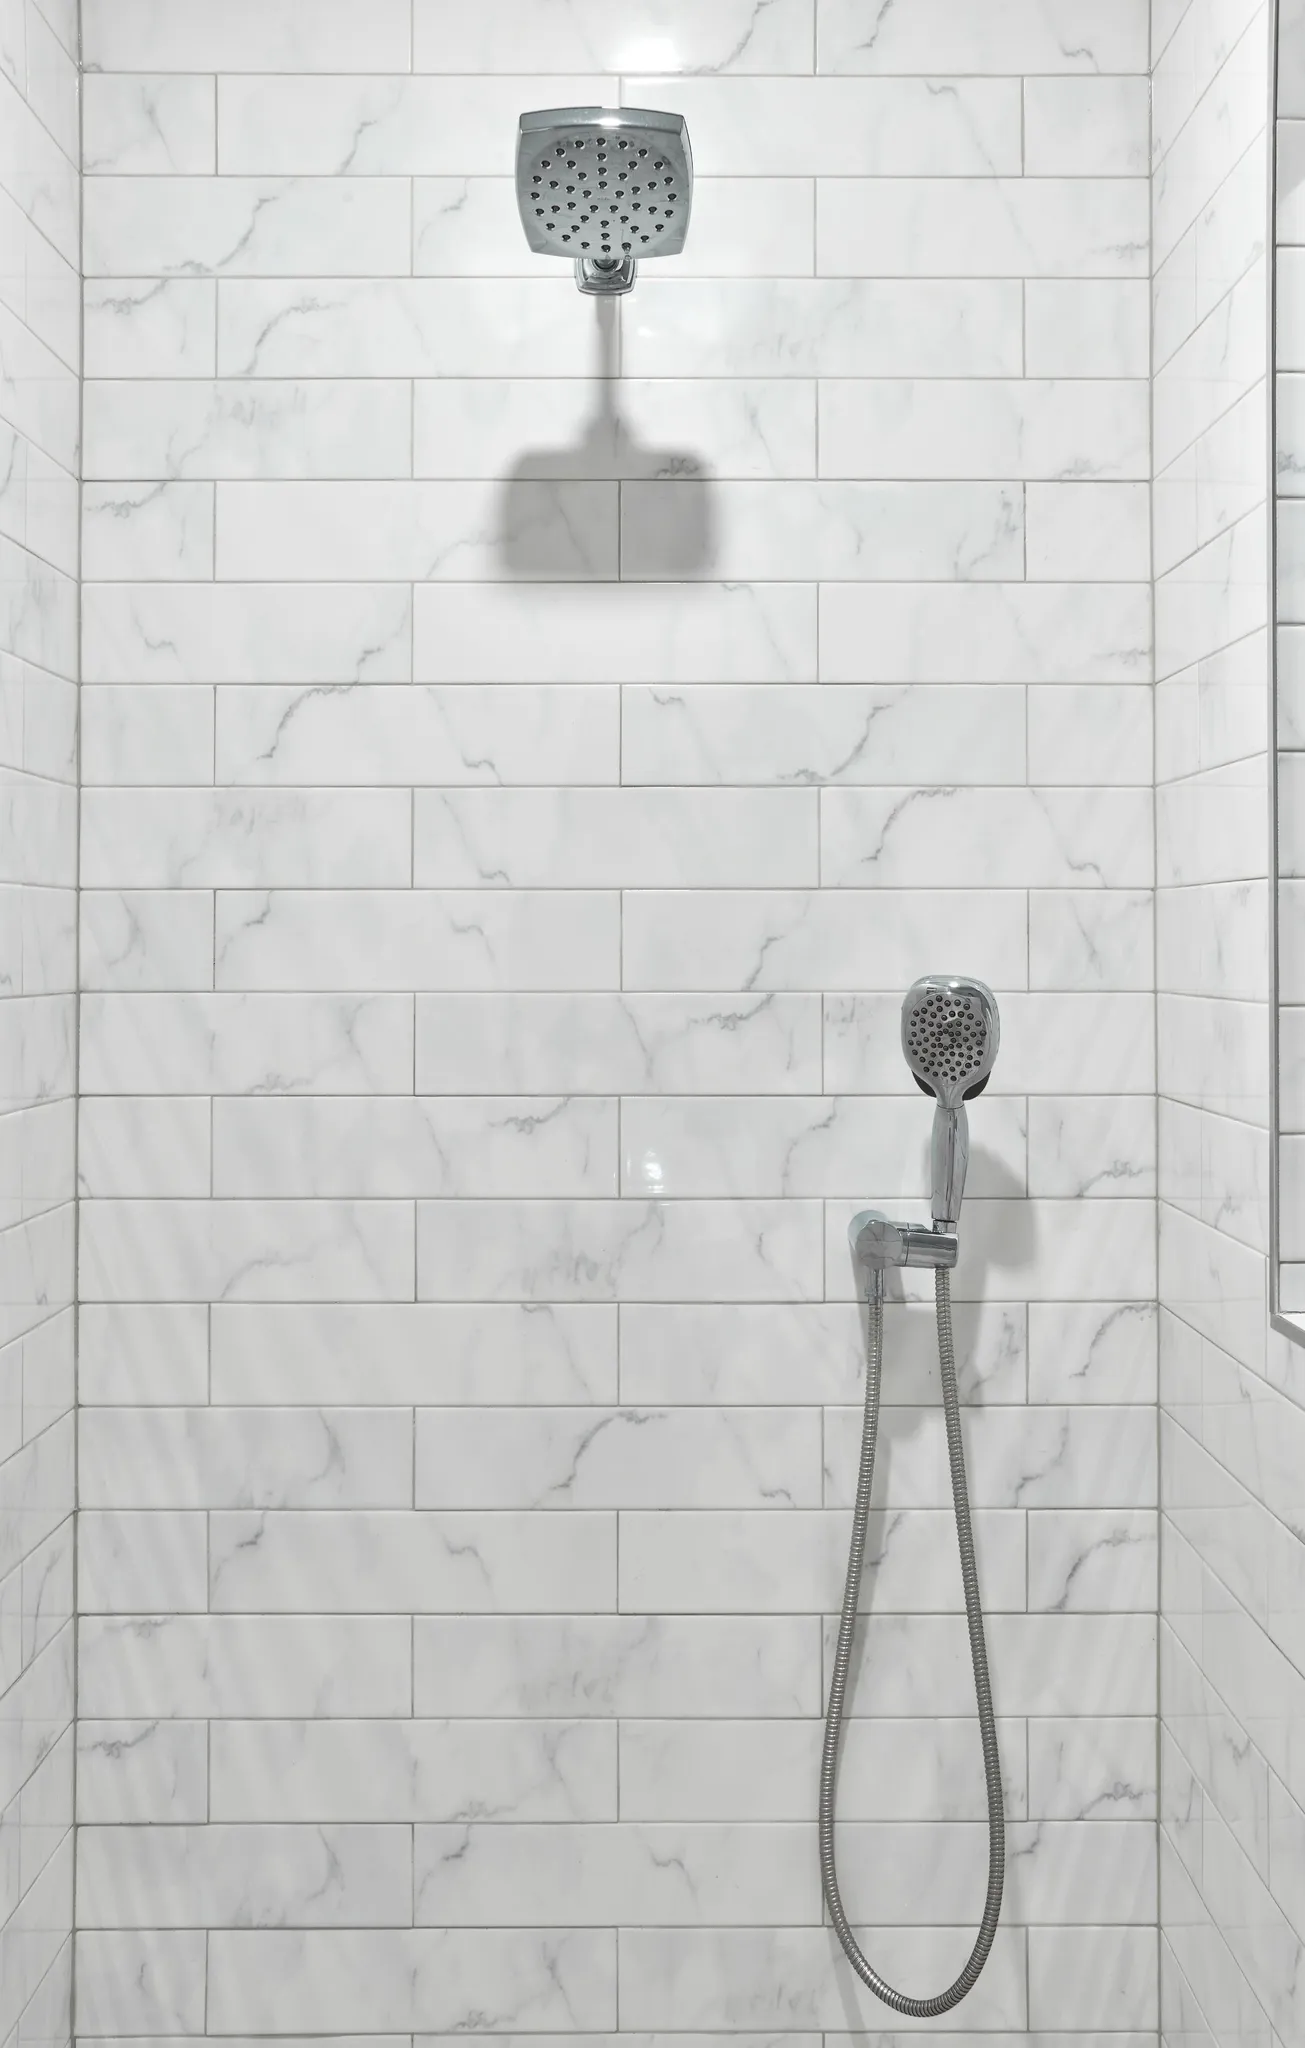 Shower tile and fixtures